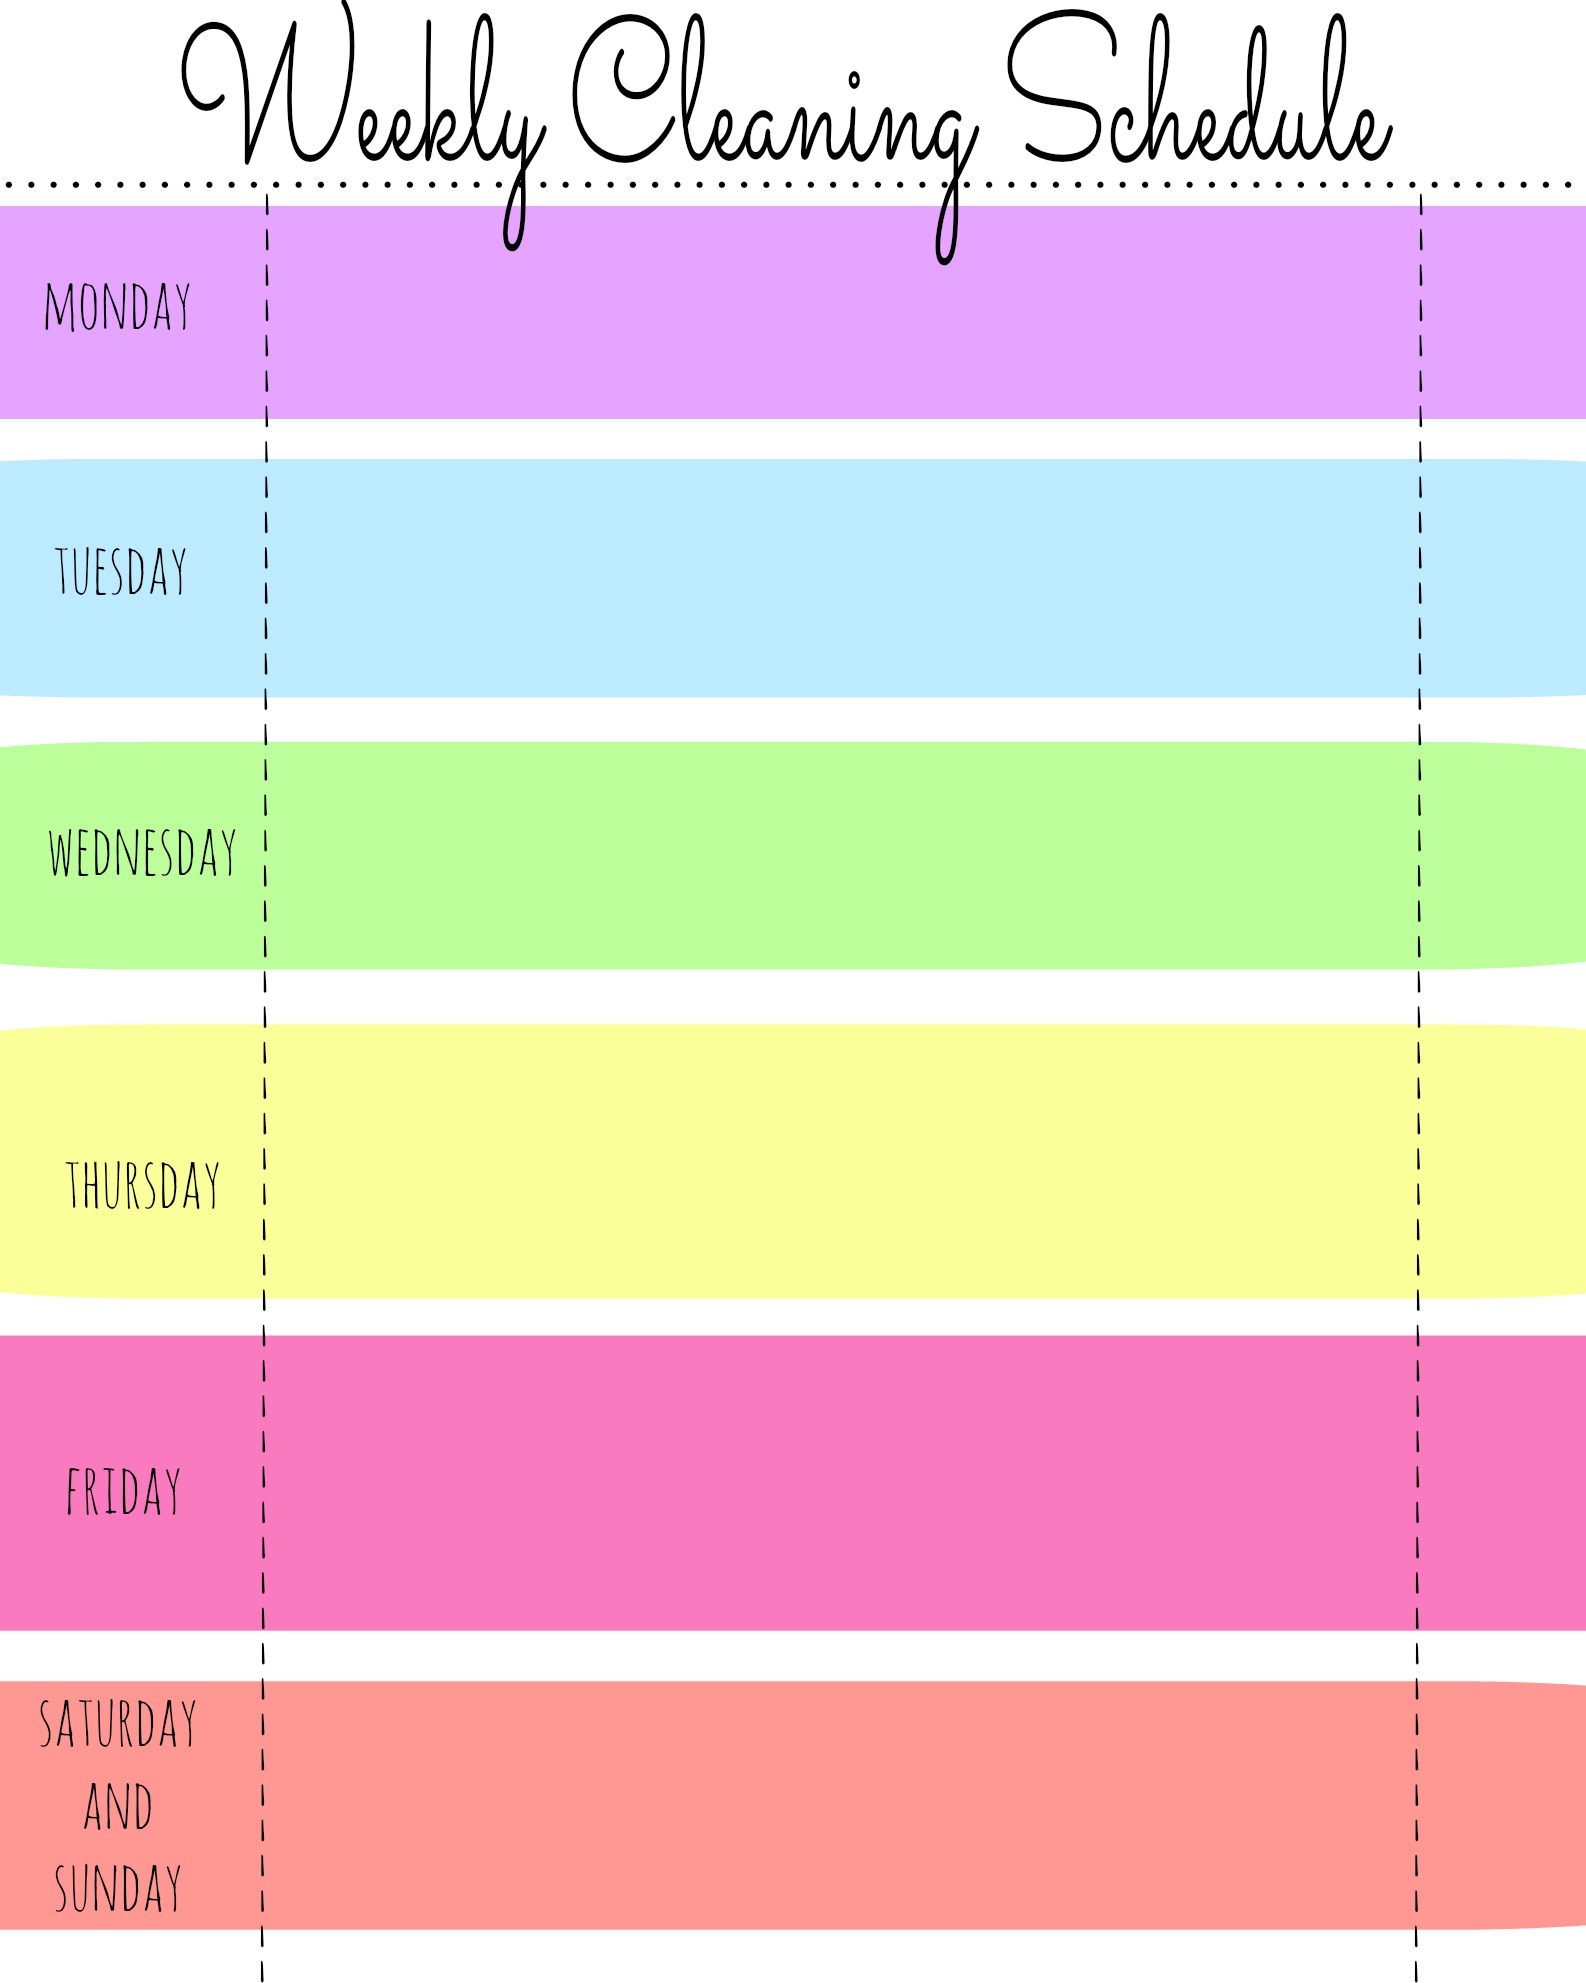 schedule-printable-images-gallery-category-page-6-printablee